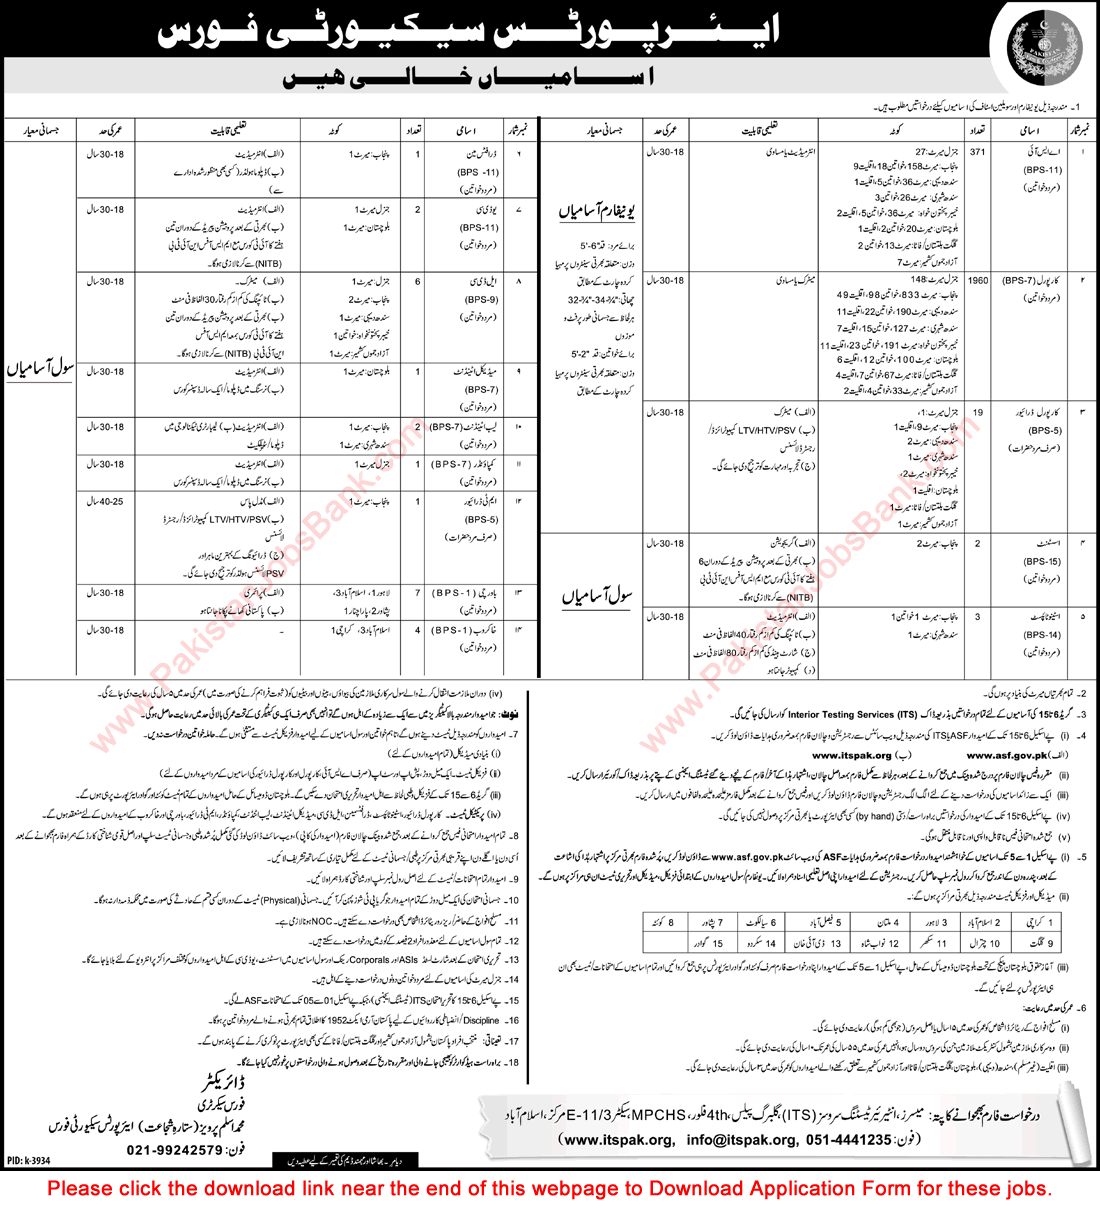 Airport Security Force Jobs April 2019 Application Form Corporals, ASI & Others ASF Latest / New